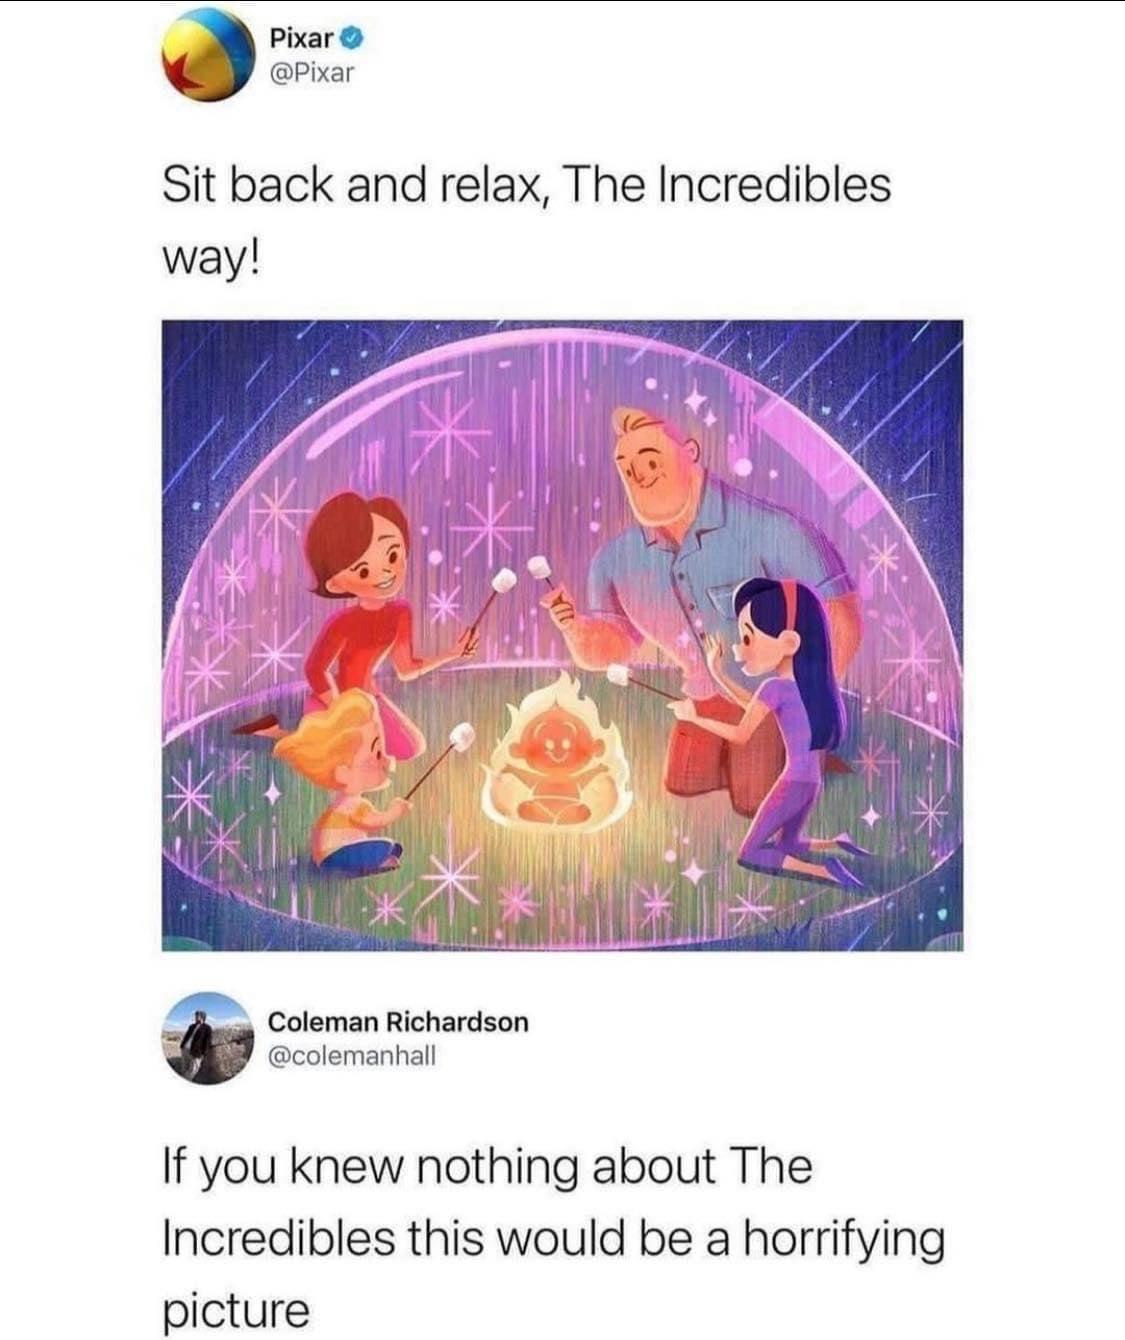 funny memes - hilarious memes - pixar sit back and relax the incredibles - Pixar Sit back and relax, The Incredibles way! Coleman Richardson If you knew nothing about The Incredibles this would be a horrifying picture